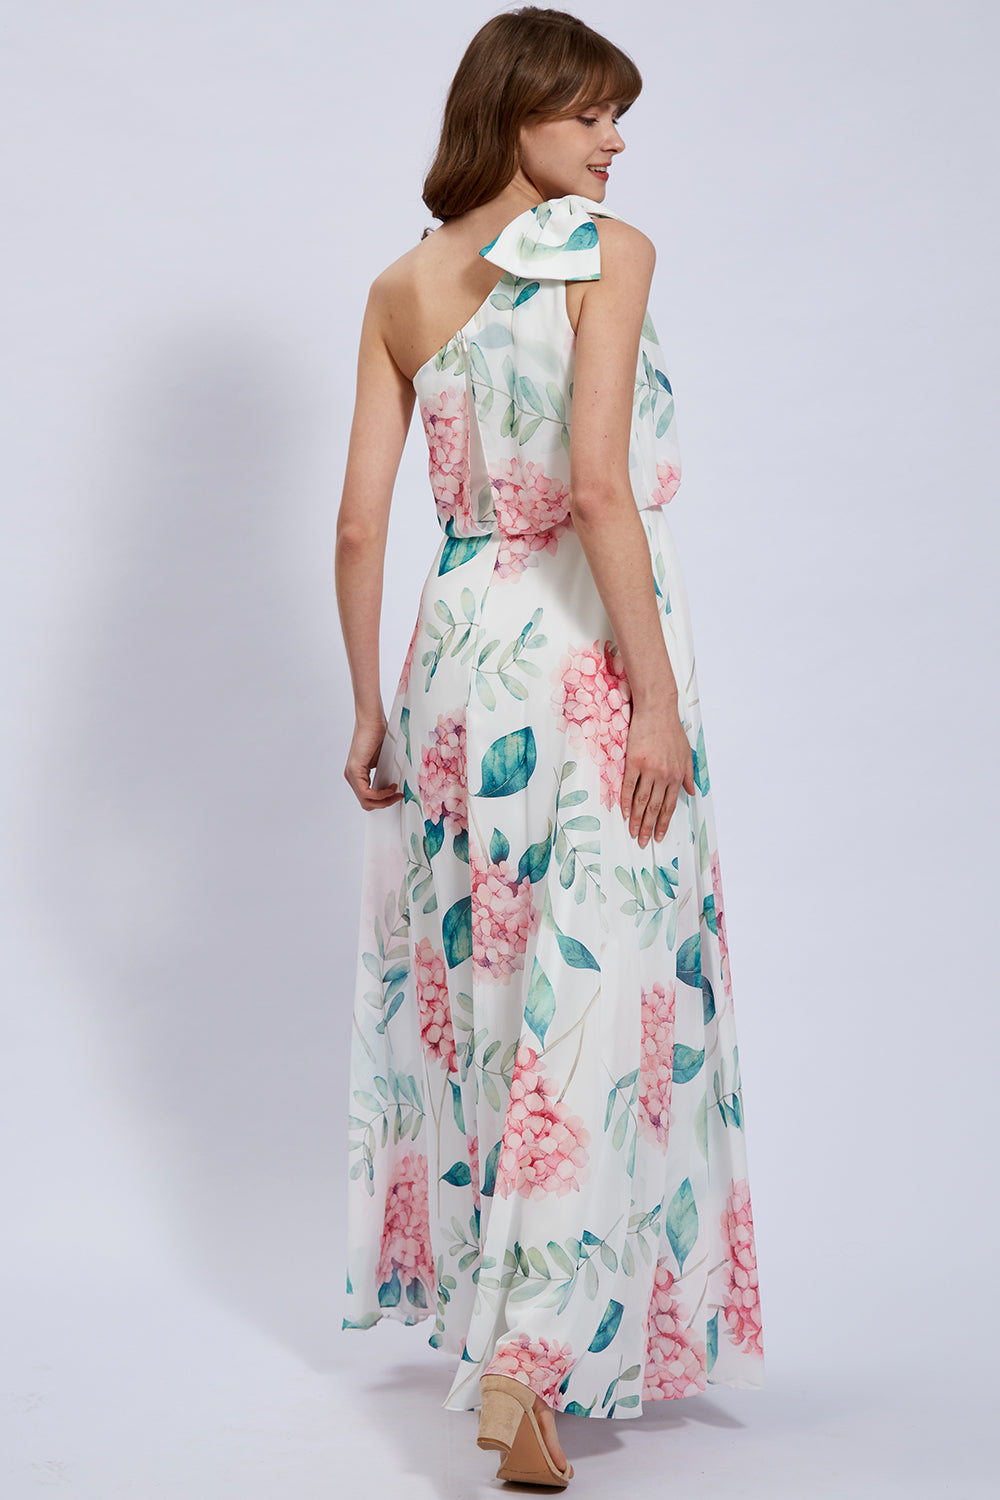 One Shoulder with Bow Flowy Chiffon Formal Evening Gown